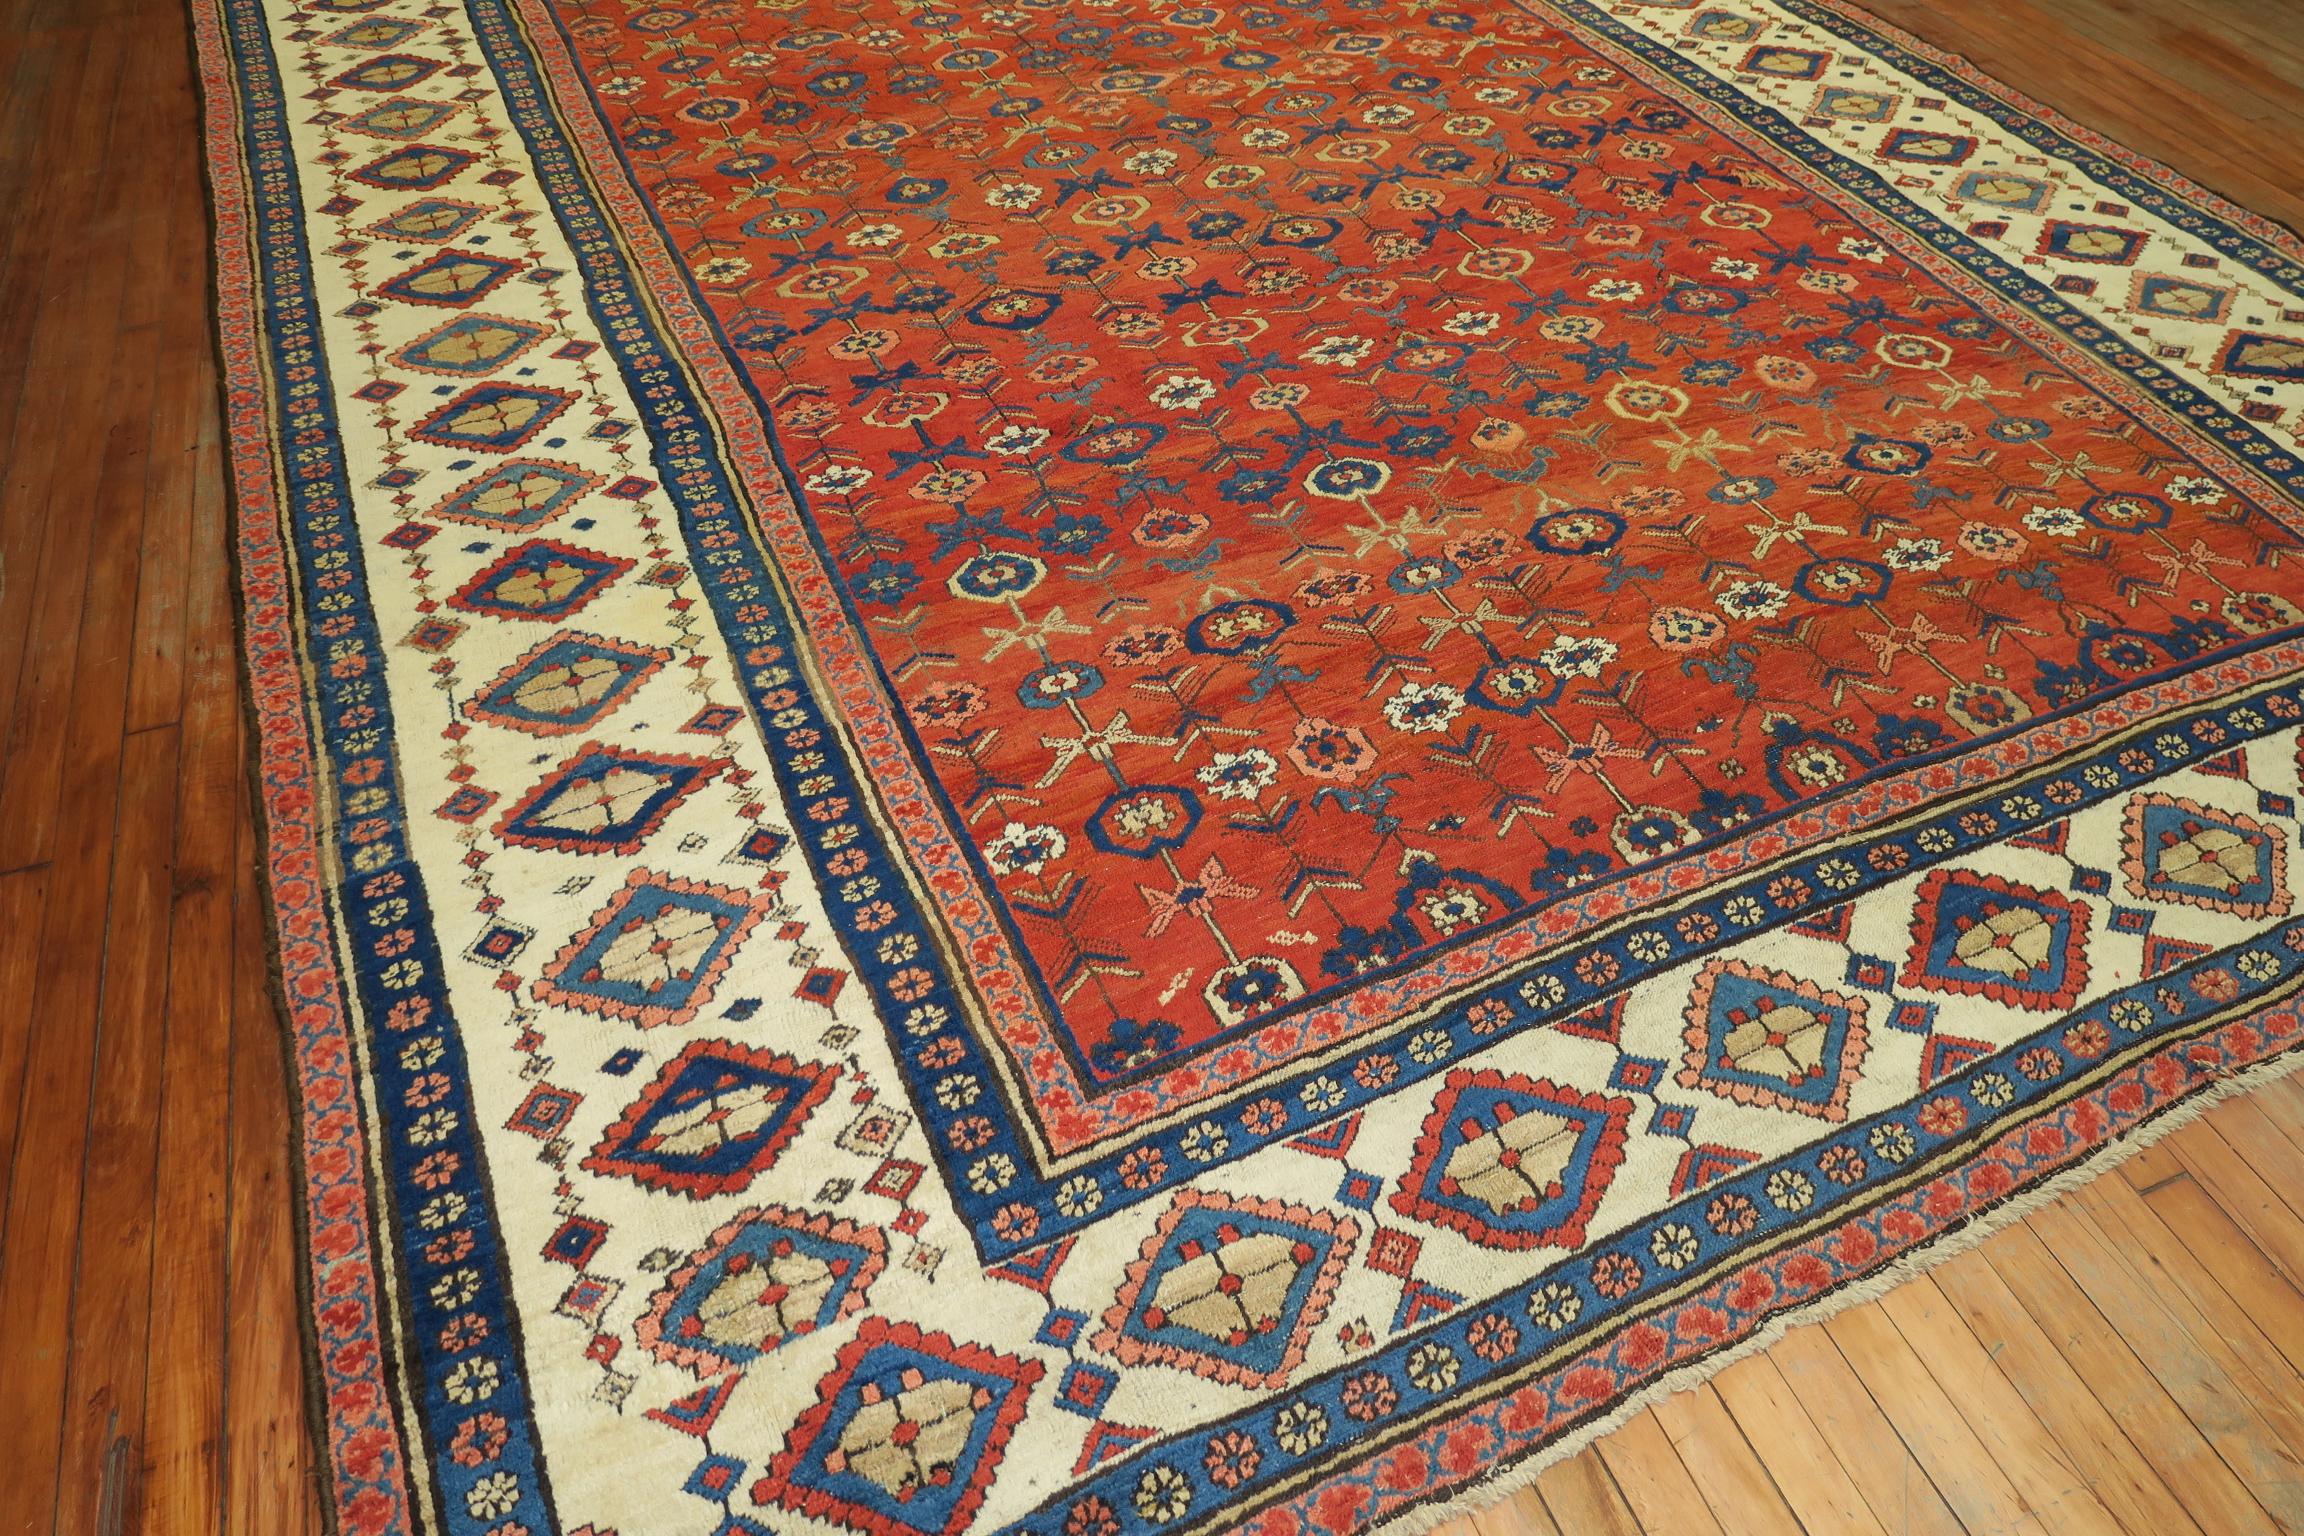 Highly collectible-quality oversize orange all-over field early 20th century Persian Bakshaish rug. The harmonious colors, skillful geometry, and weaver's craftsmanship make this rug an absolute work of art.

Measures: 10'5